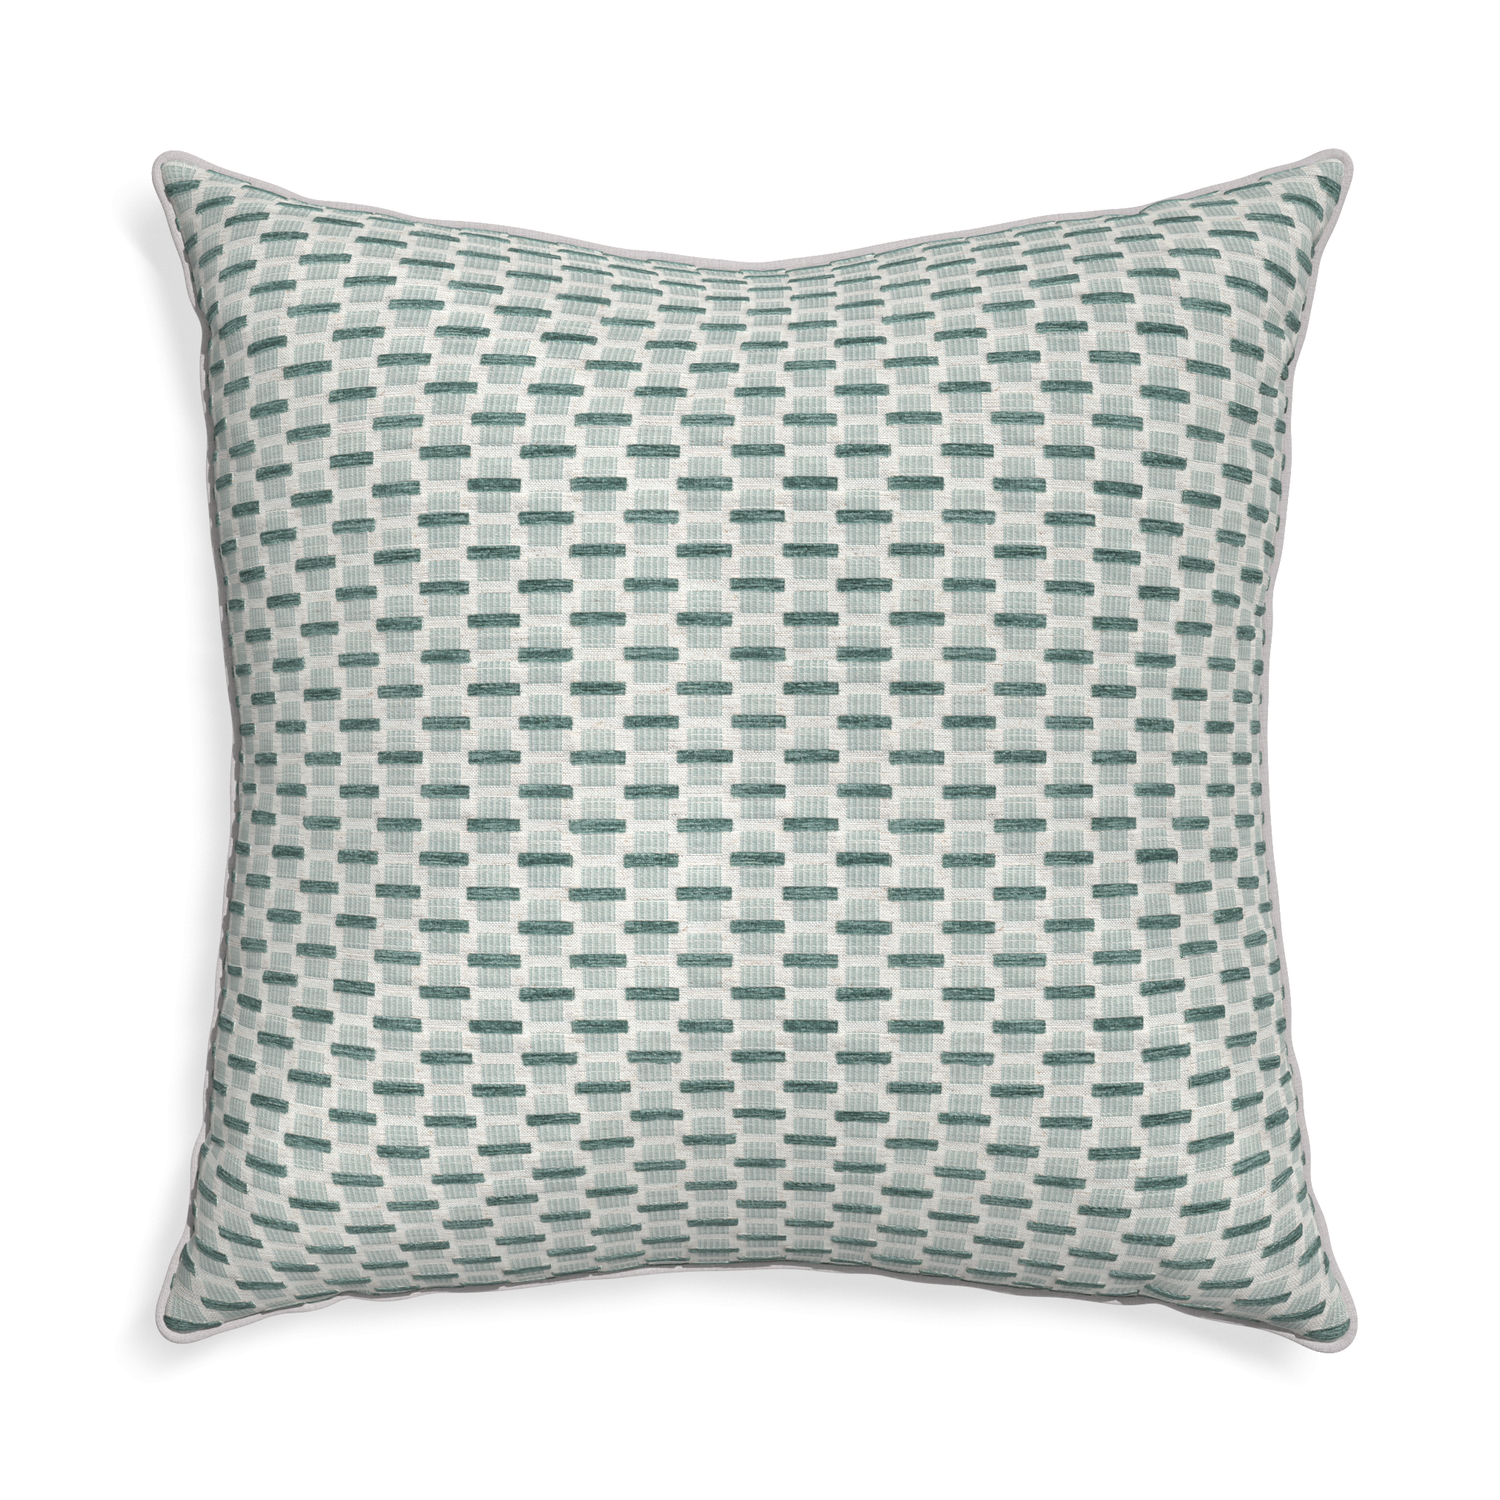 Euro-sham willow mint custom green geometric chenillepillow with pebble piping on white background